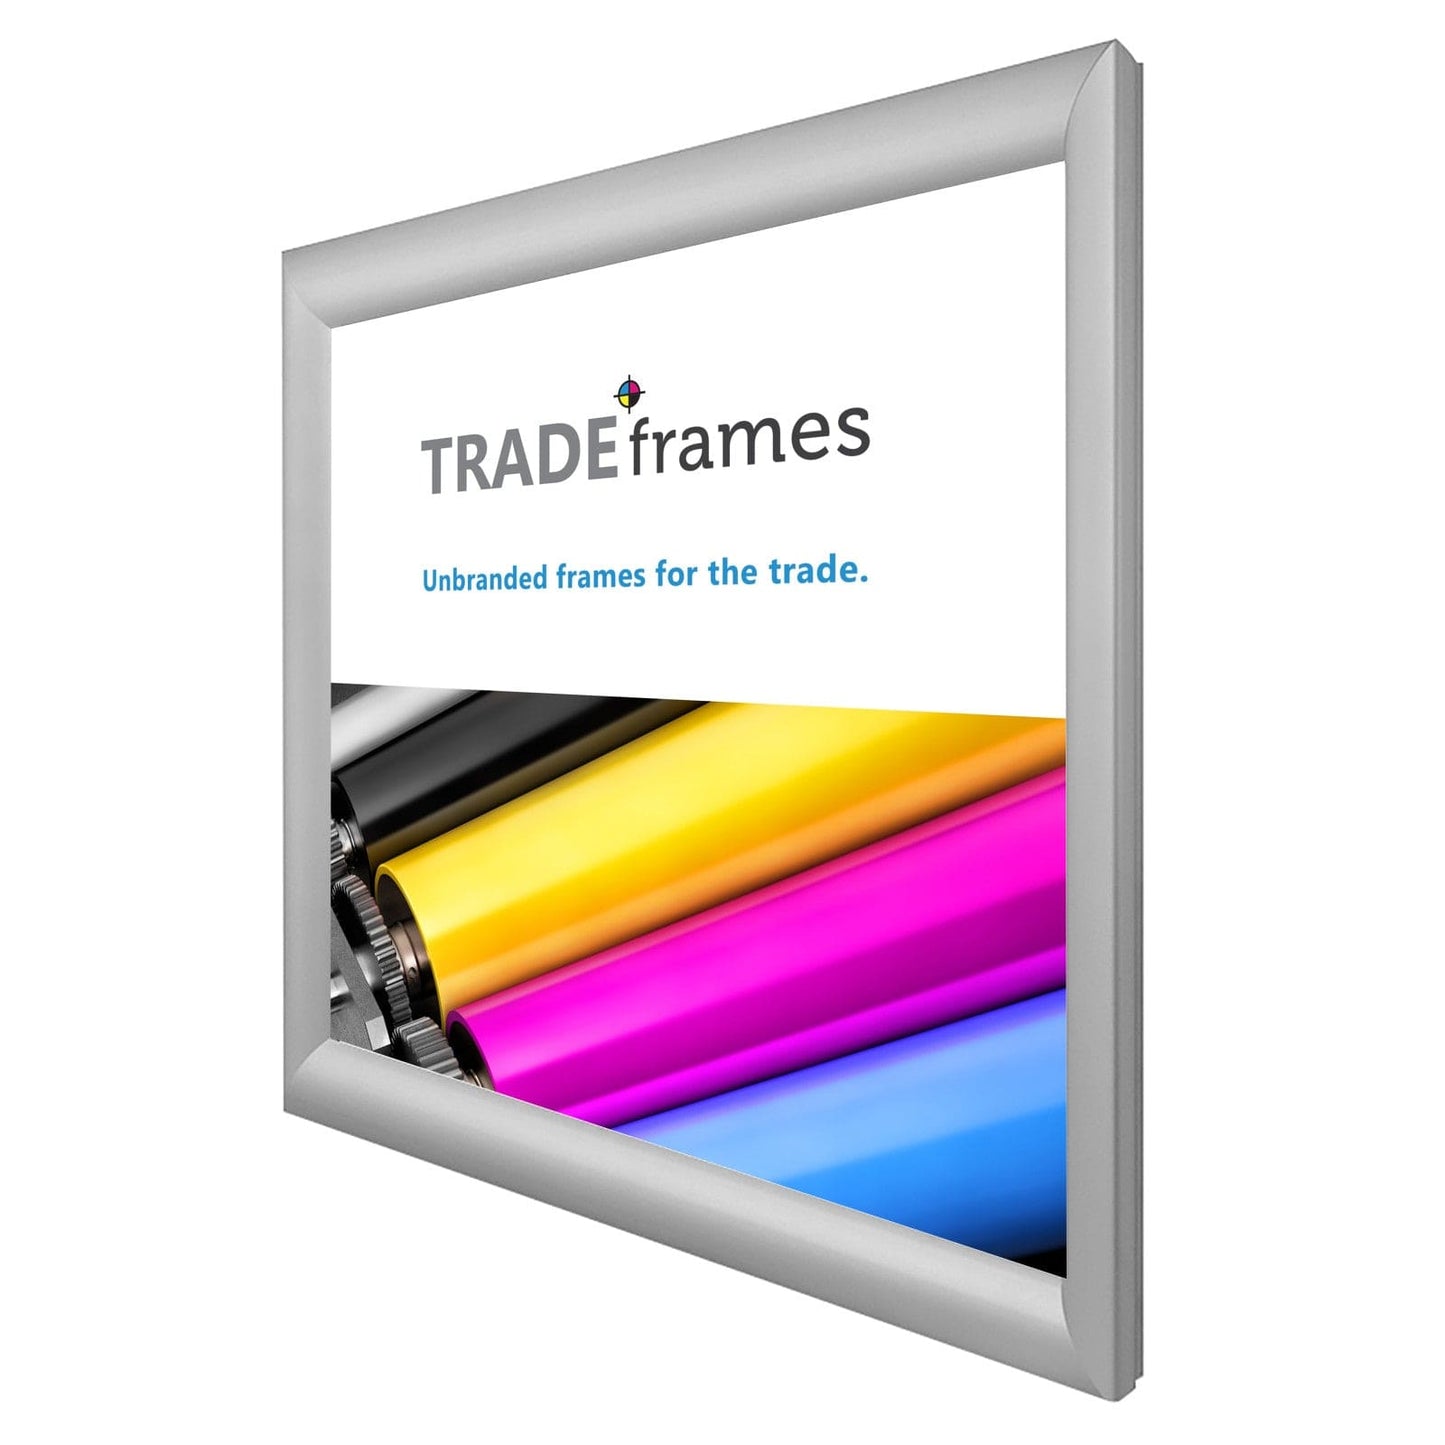 16x16  TRADEframe Silver Snap Frame 16x16 - 1.2 inch profile - Snap Frames Direct